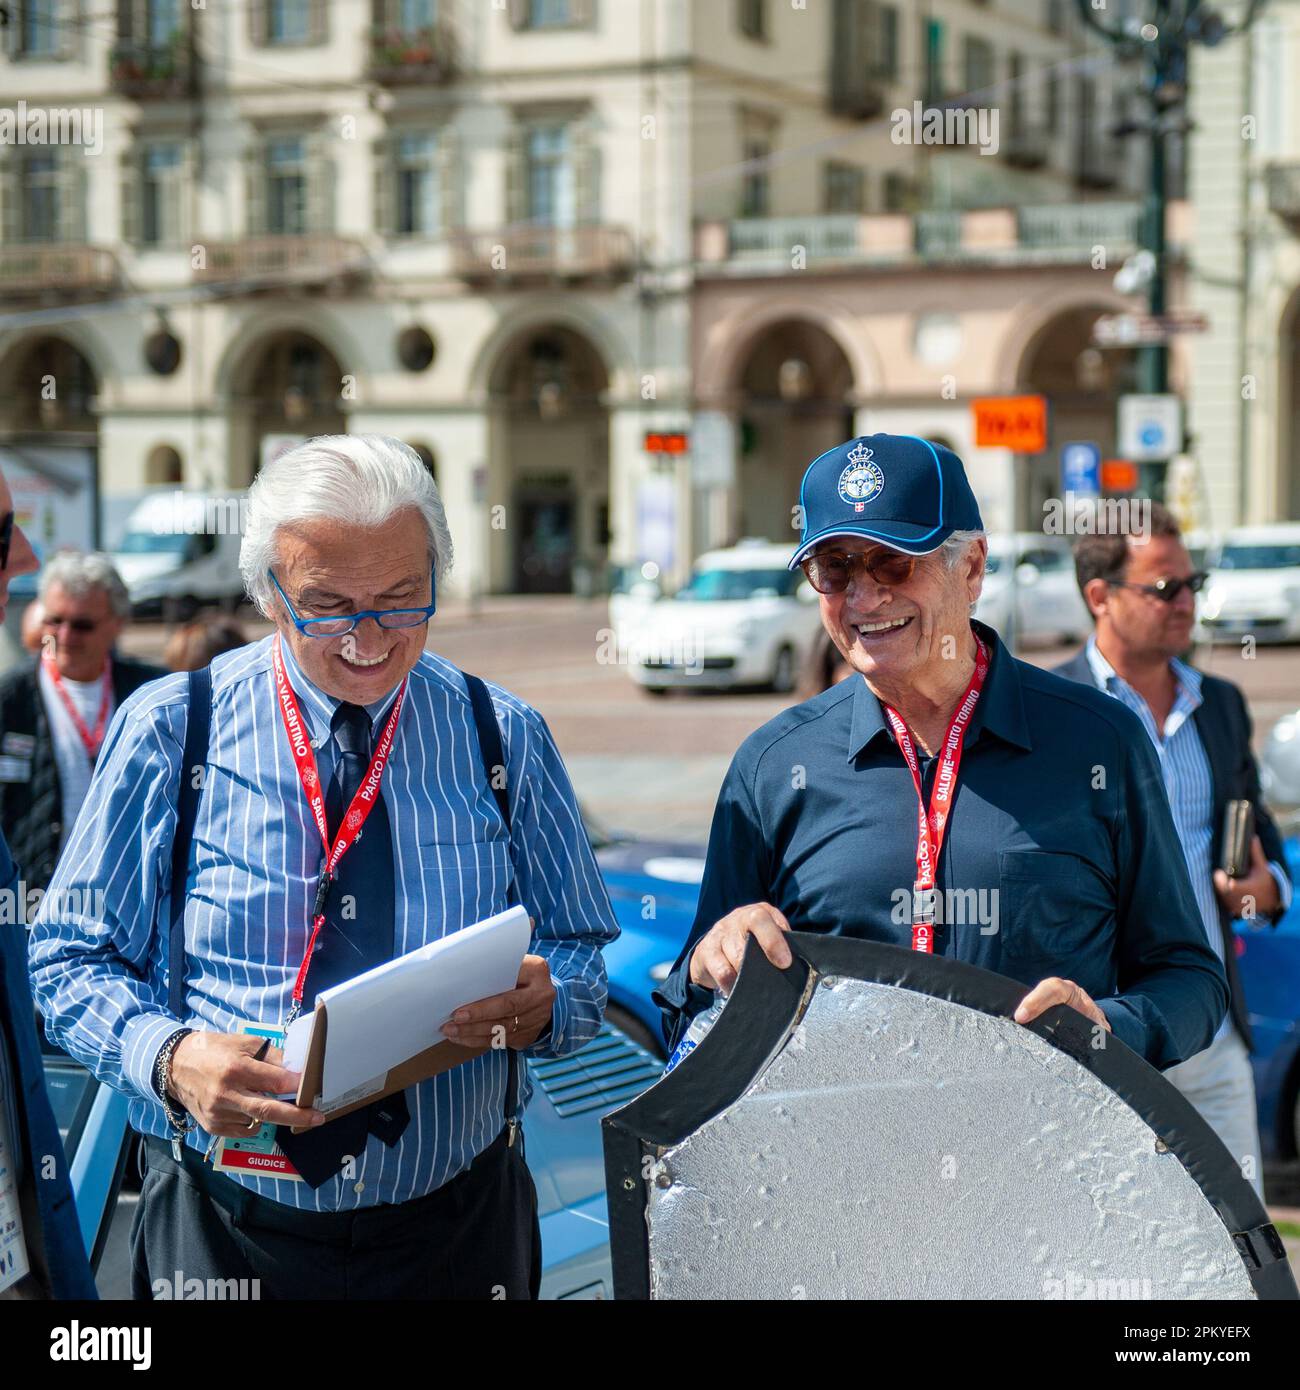 06/22/2019 Turin (Italy) A smiling Giorgetto Giugiaro during an elegance contest for historic cars Stock Photo